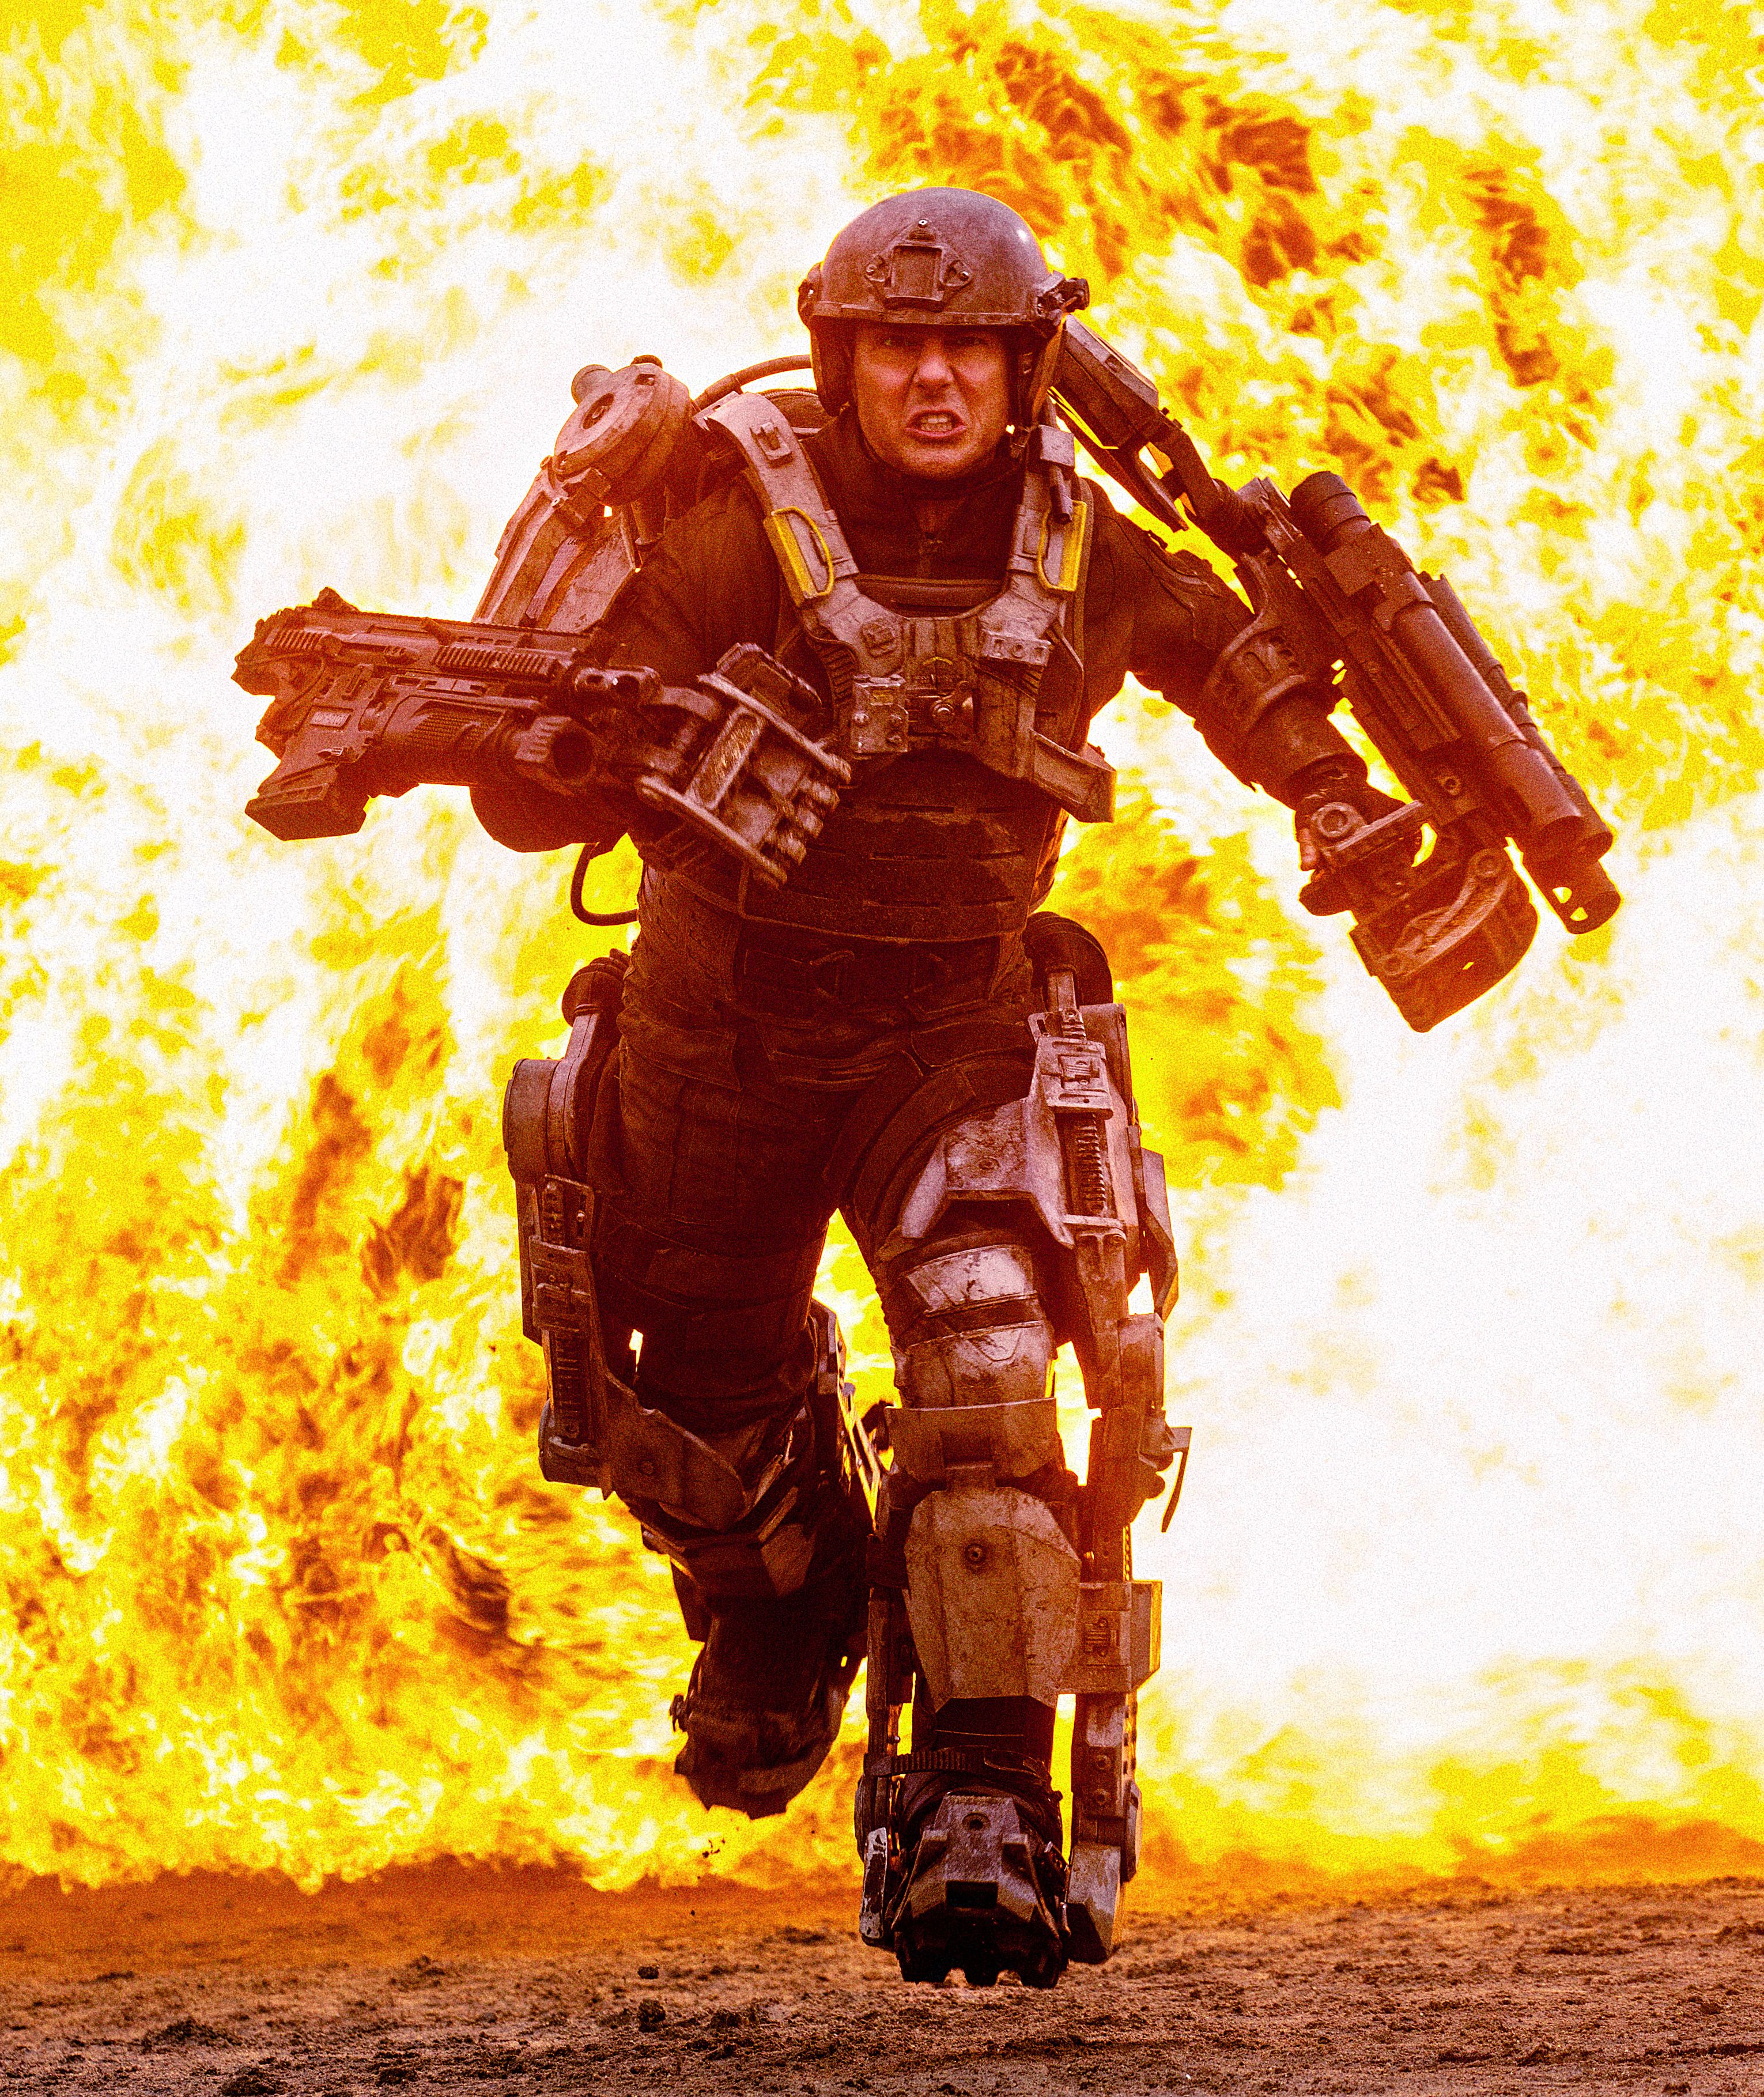 Tom Cruise extremely on fire, Edge of Tomorrow